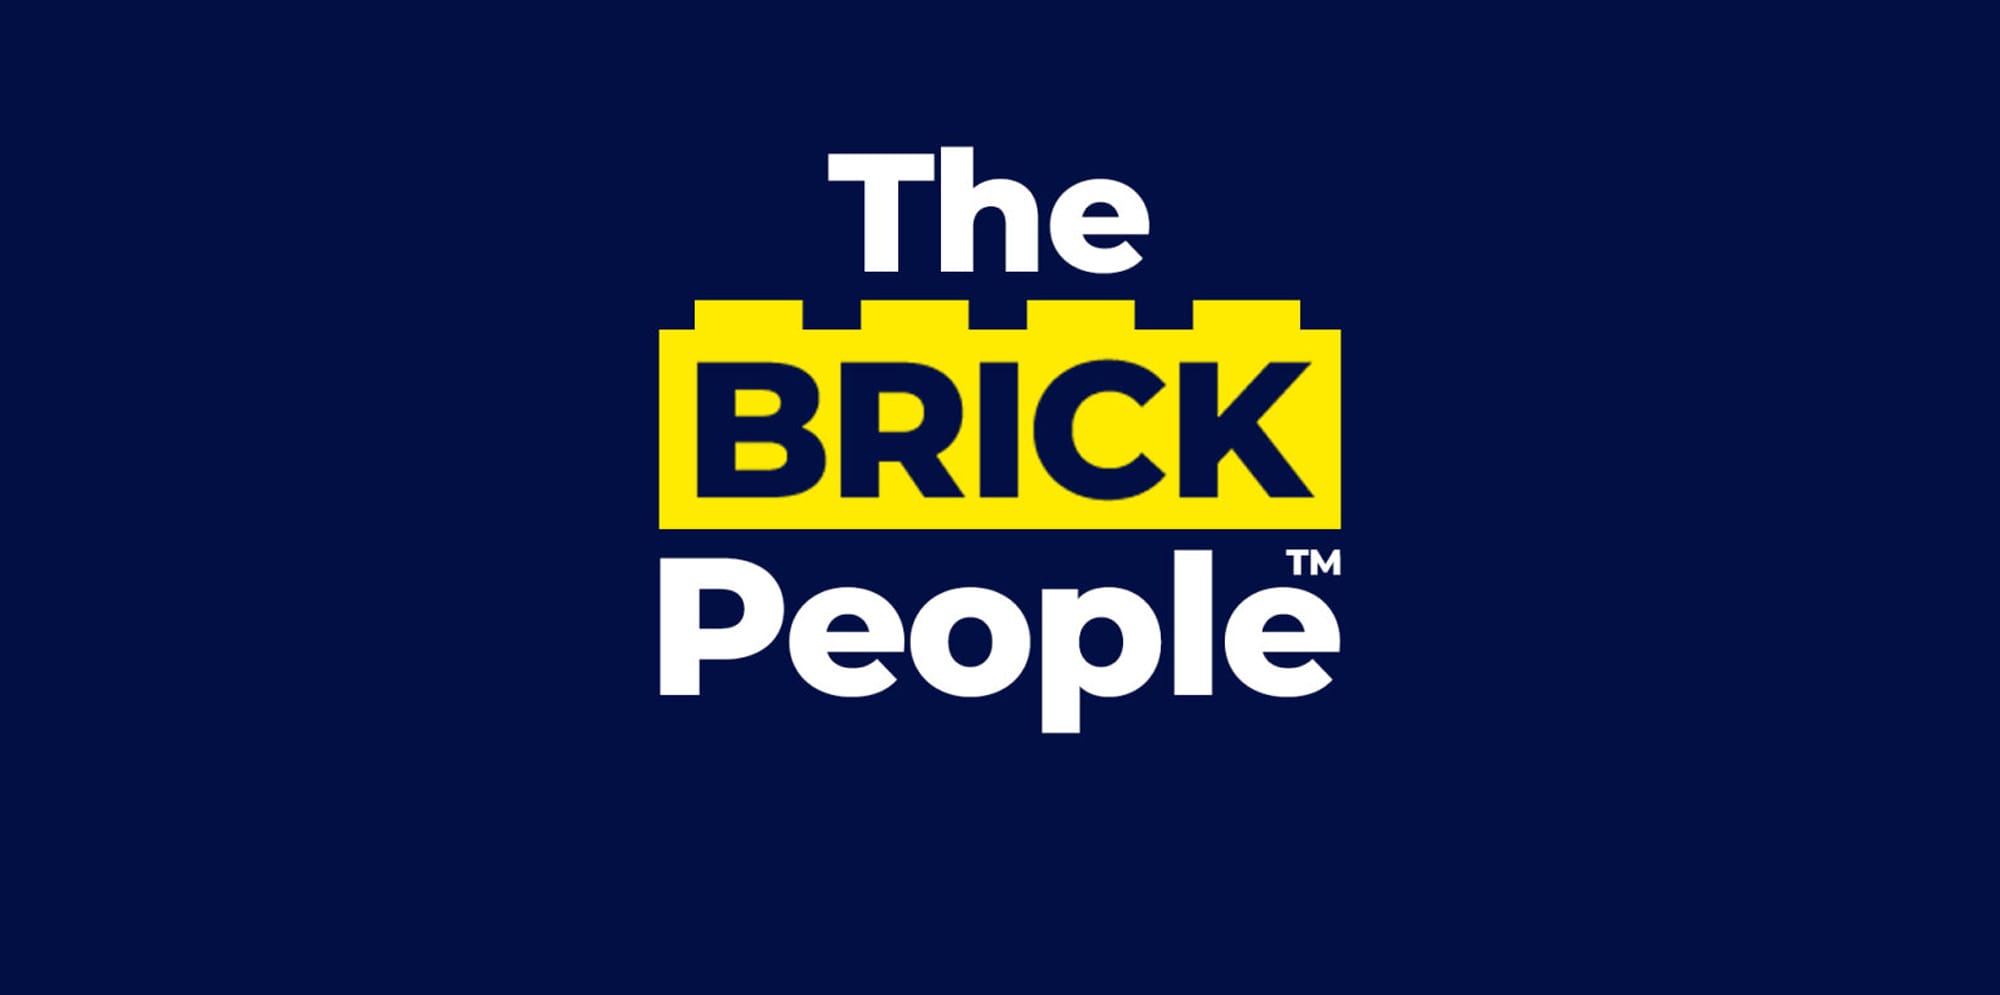 Block text reads 'The Brick People - trademark symbol' against a navy blue background. The word 'brick' is embedded in a bright yellow lego style block.